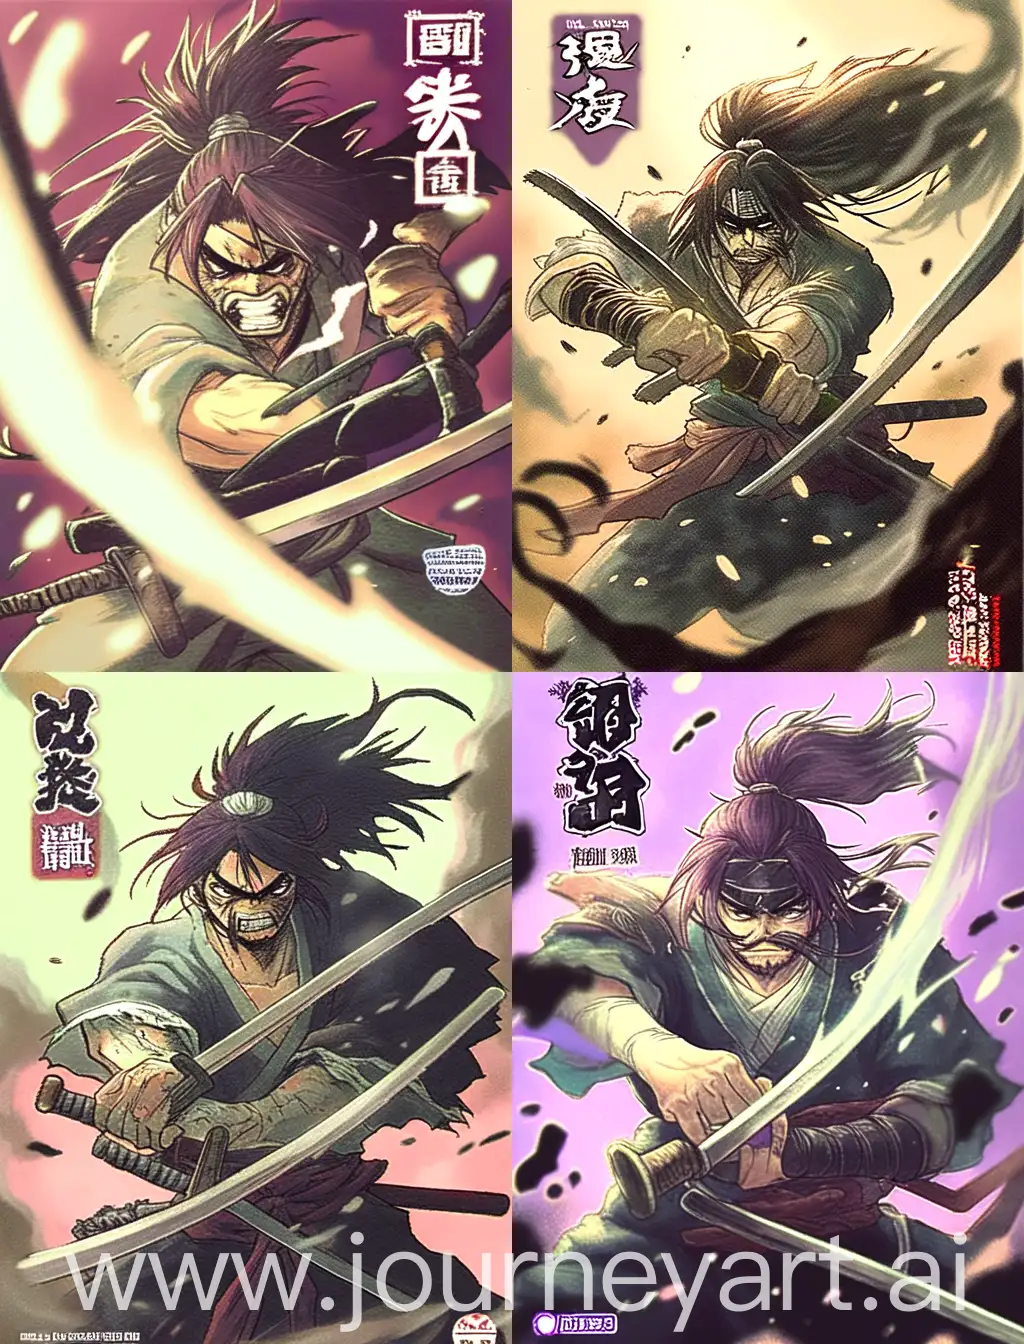 1 man, wearing Japanese samurai uniform, fierce warrior with long hair, wearing tattered clothing. He aims a weapon aggressively towards the viewer, creating an intense atmosphere. Edo(Japanese period)